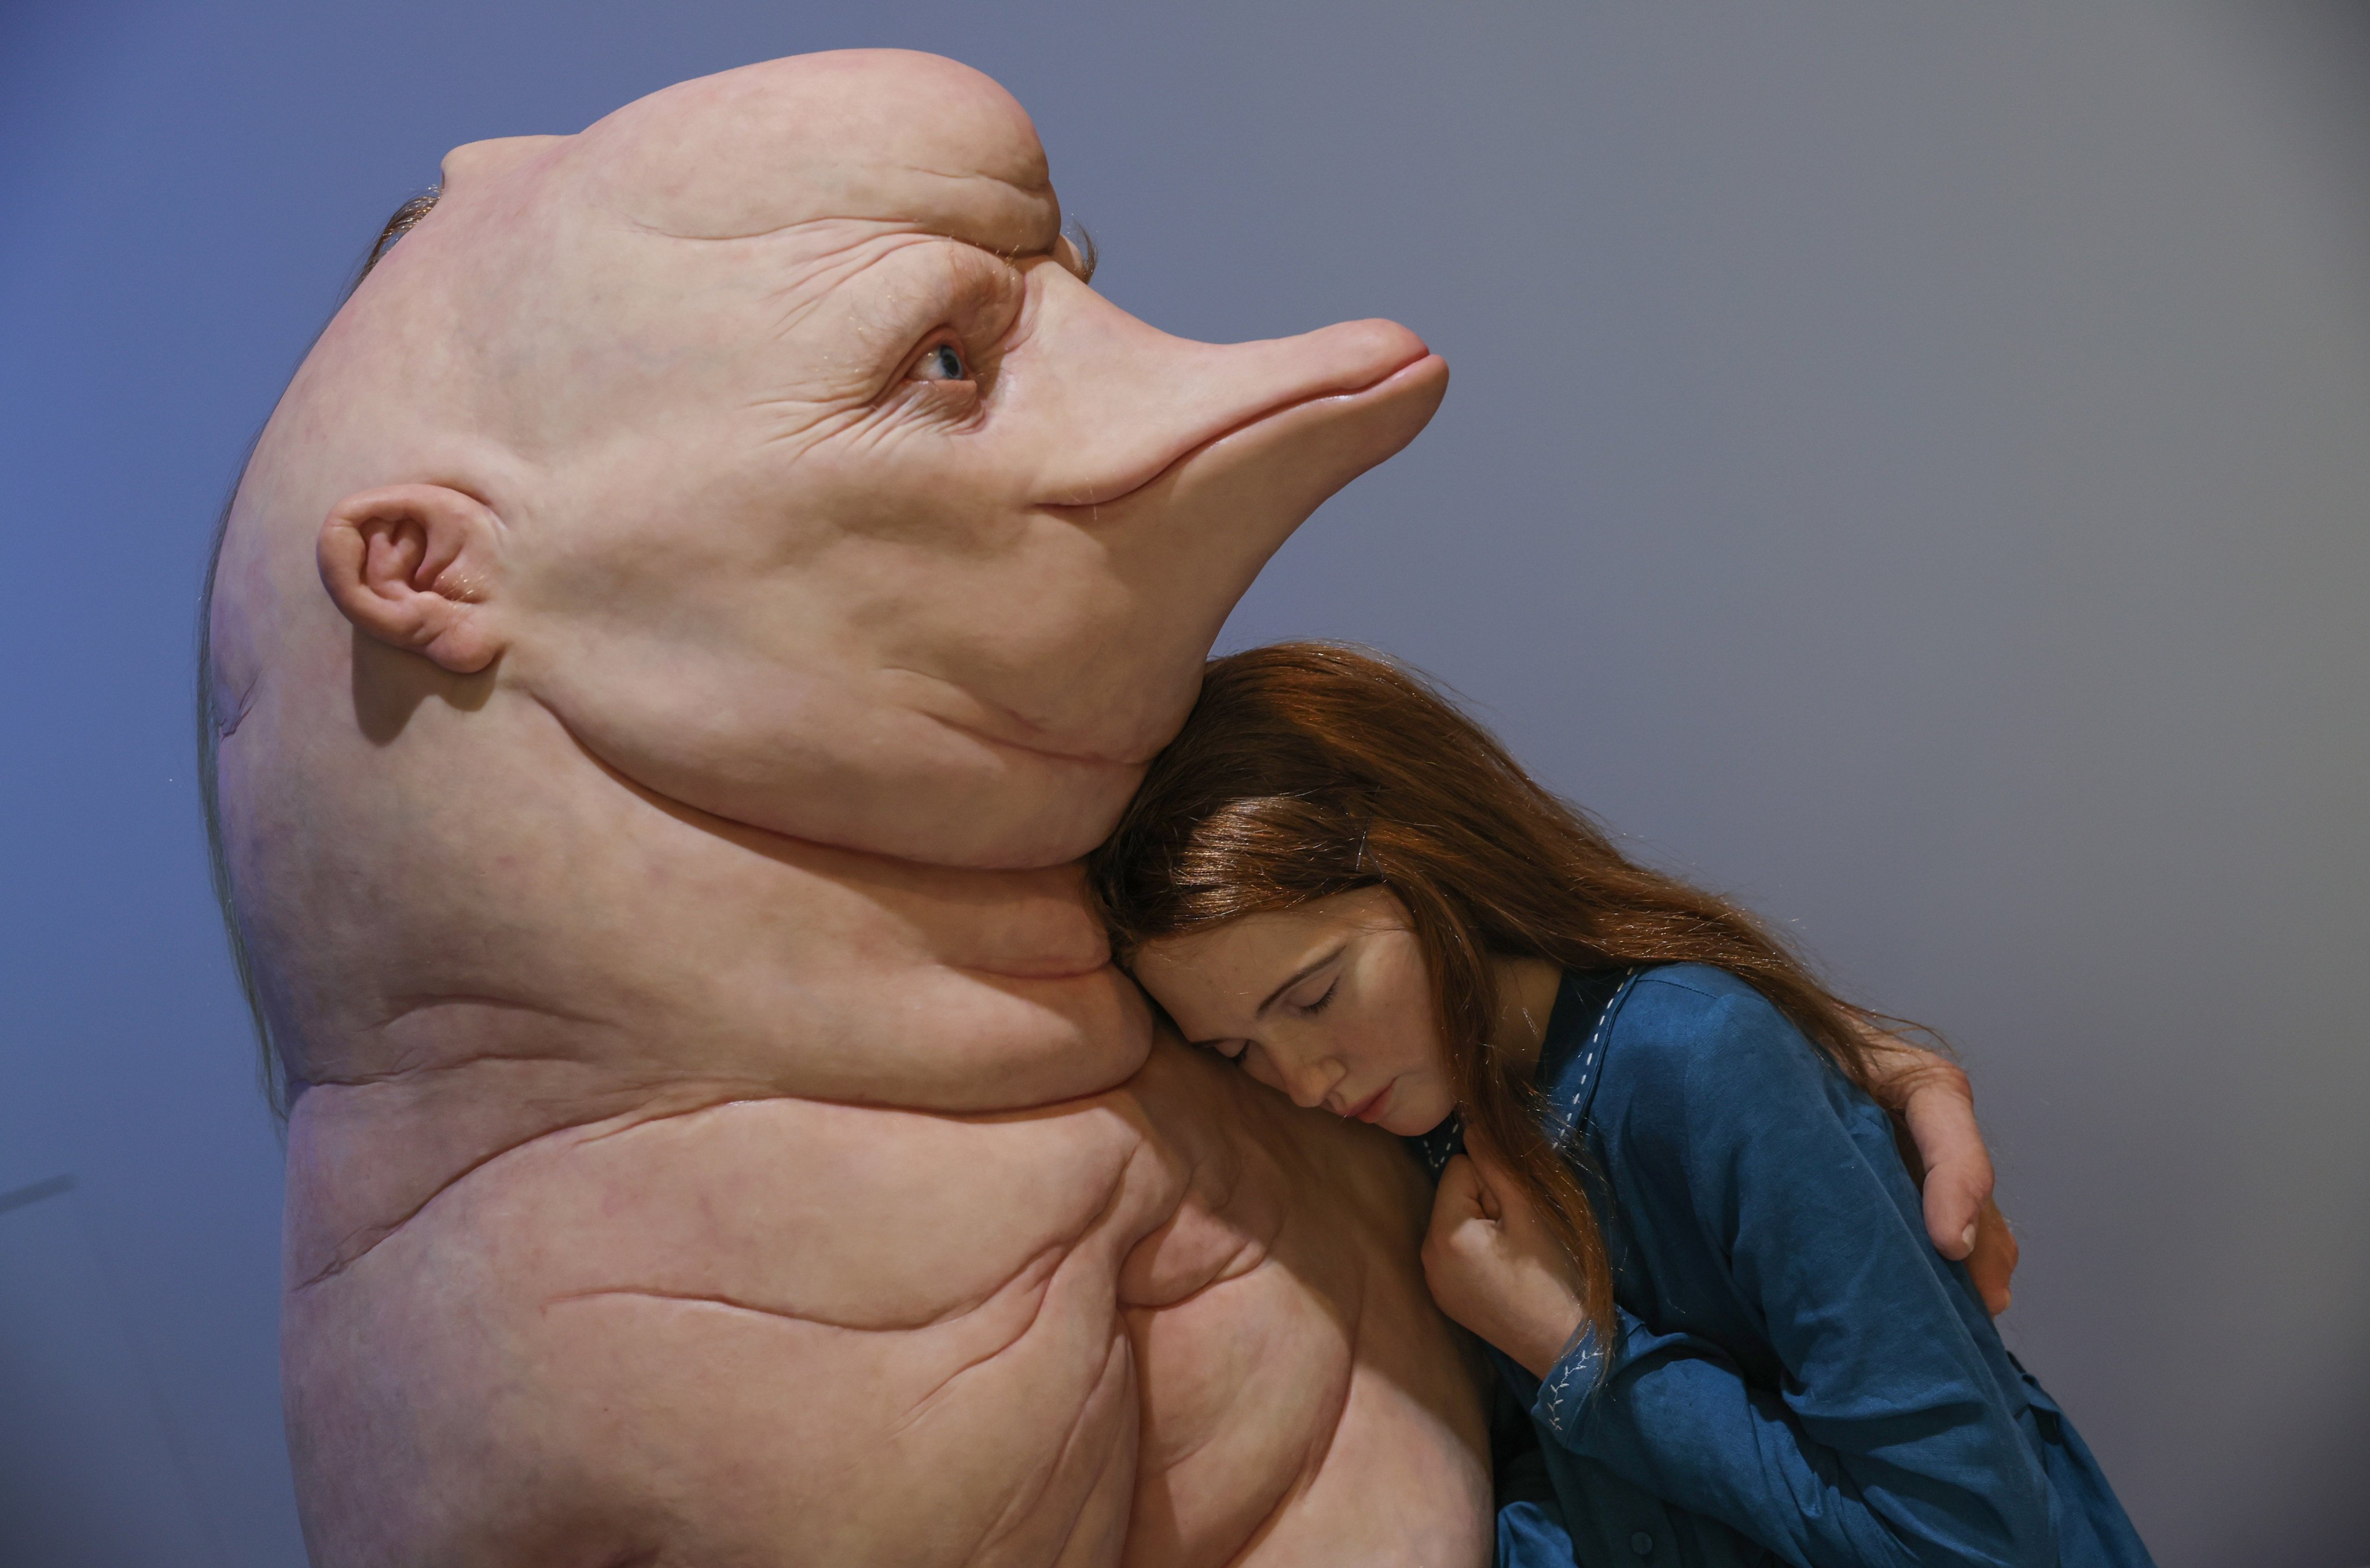 “No Fear of Depths, 2019” by Australian artist Patricia Piccinini is displayed at Tai Kwun in Central, Hong Kong, in June 2023. A story covering the exhibition of “gross” sculptures was one of the Post’s most popular arts stories of 2023. Photo: Yik Yeung-man